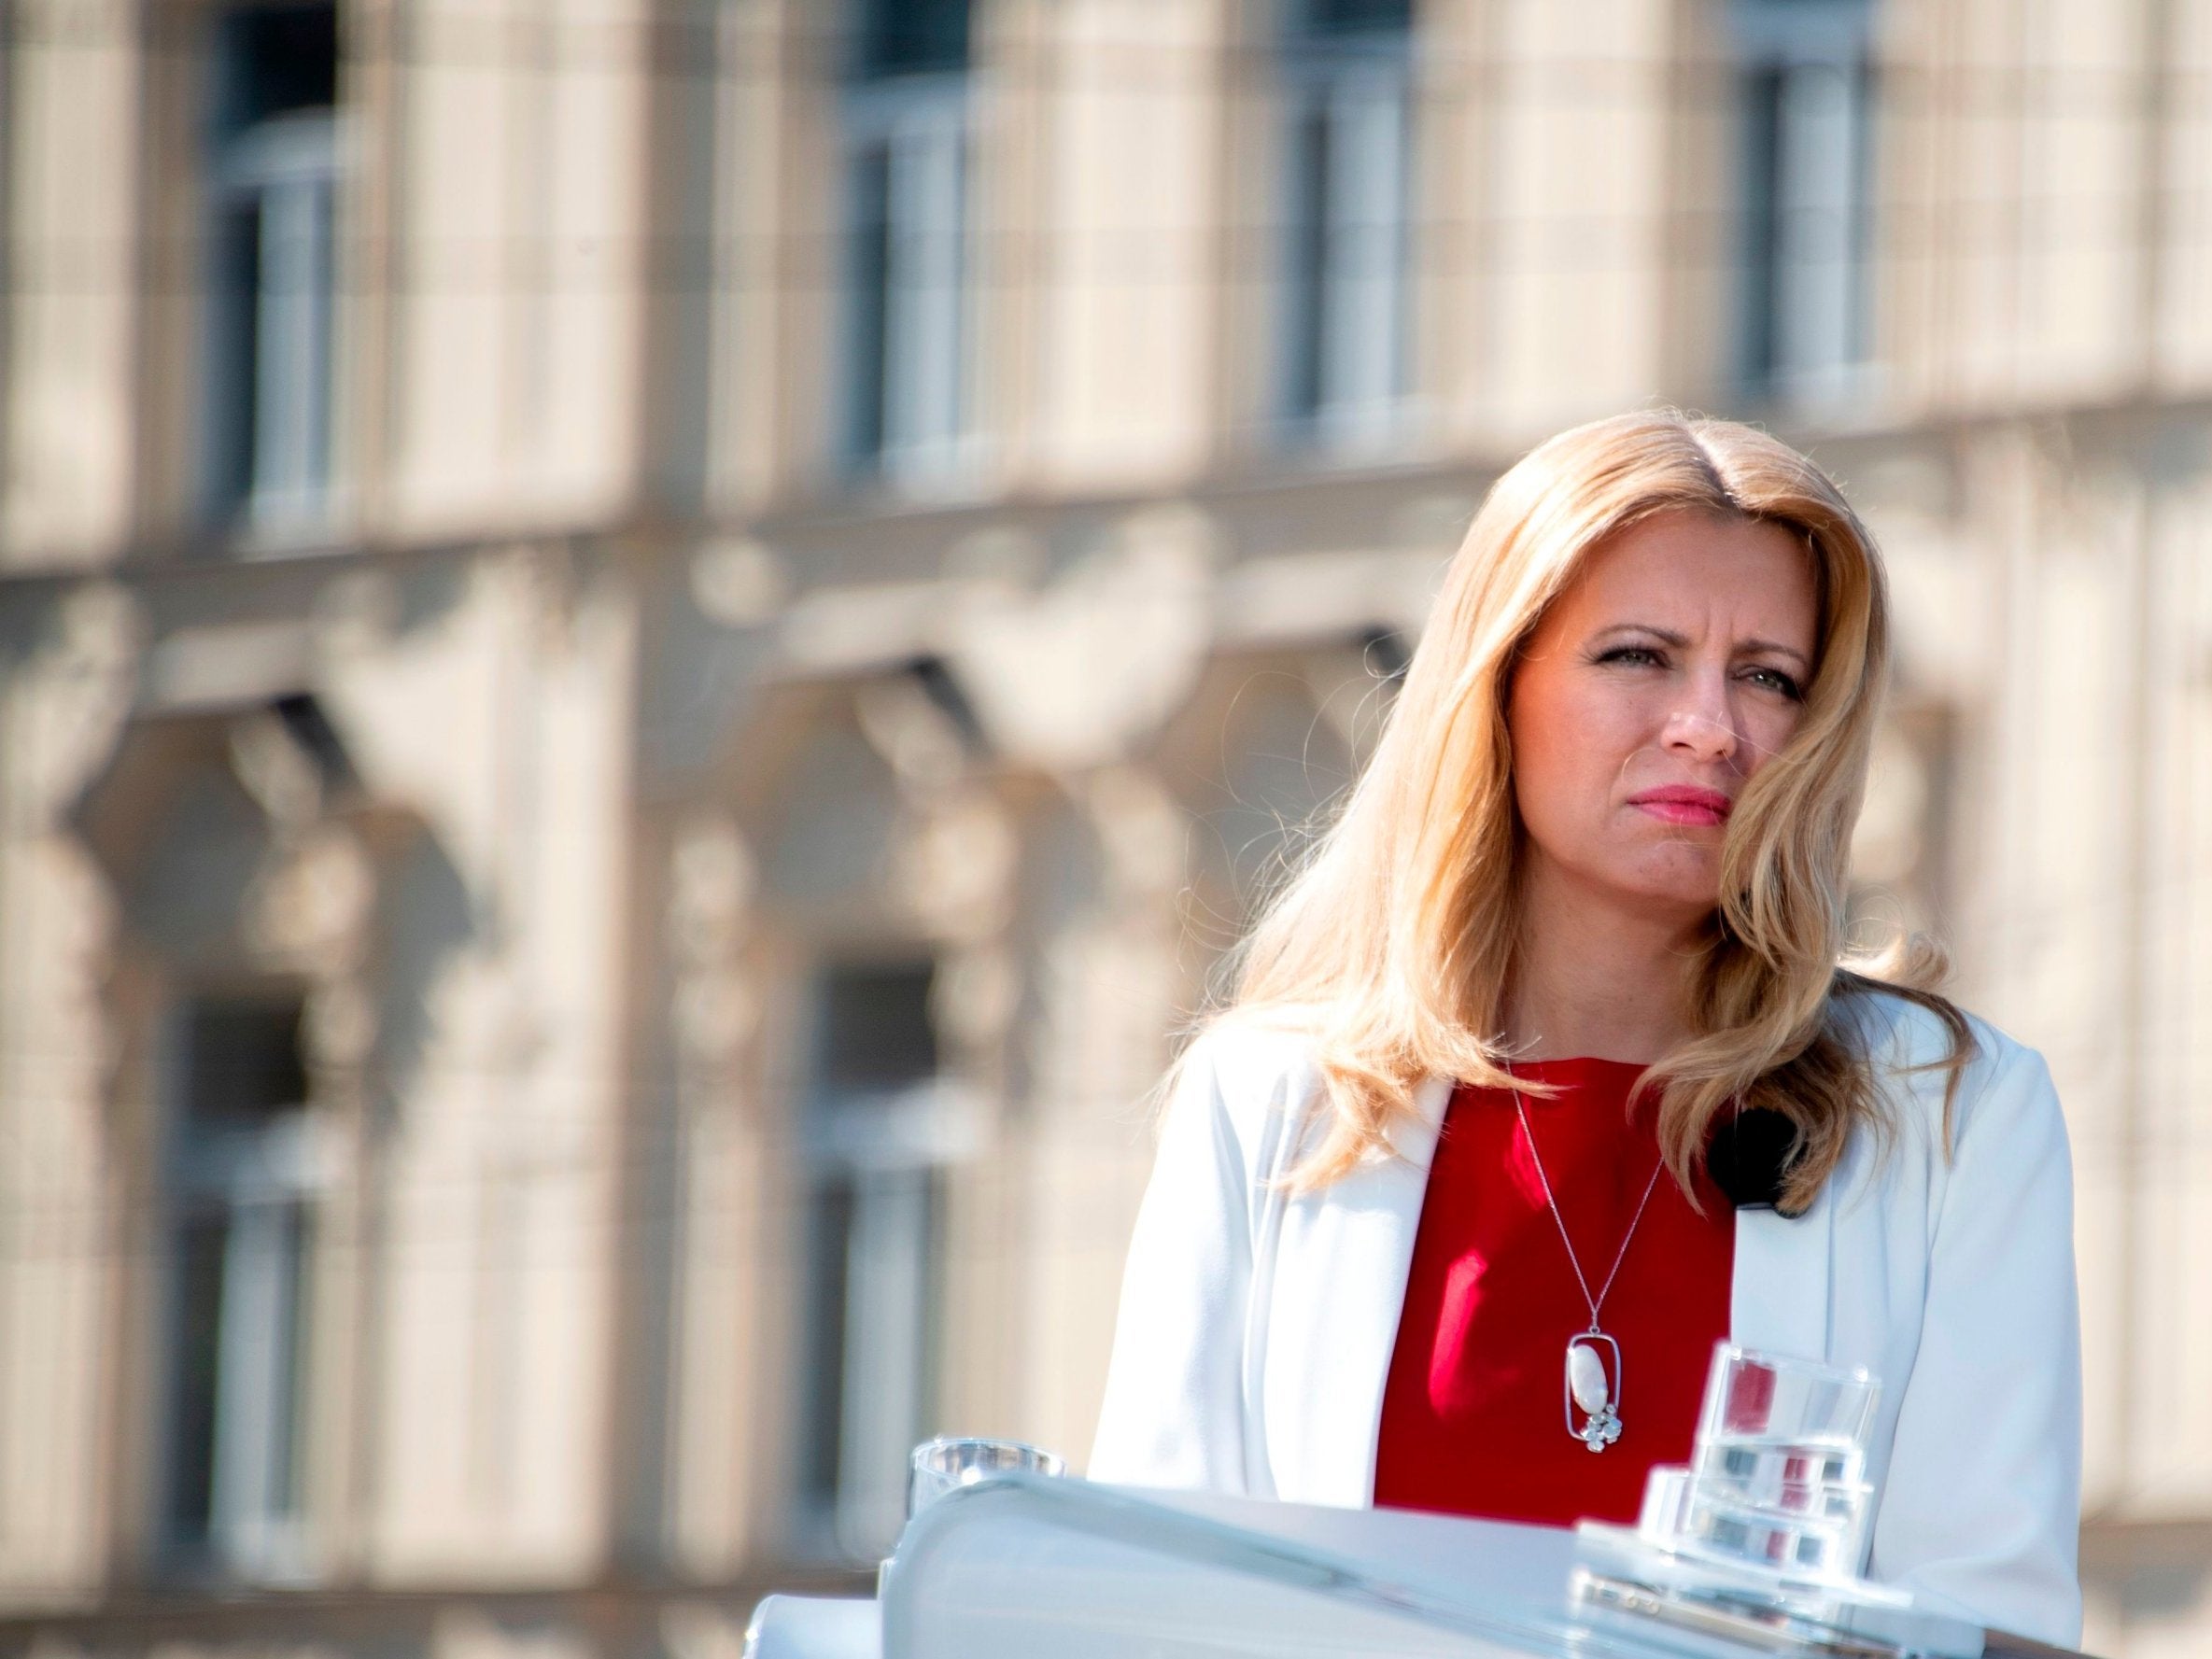 Caputova: ‘It is possible not to succumb to populism, to tell the truth, to raise interest without an aggressive vocabulary’